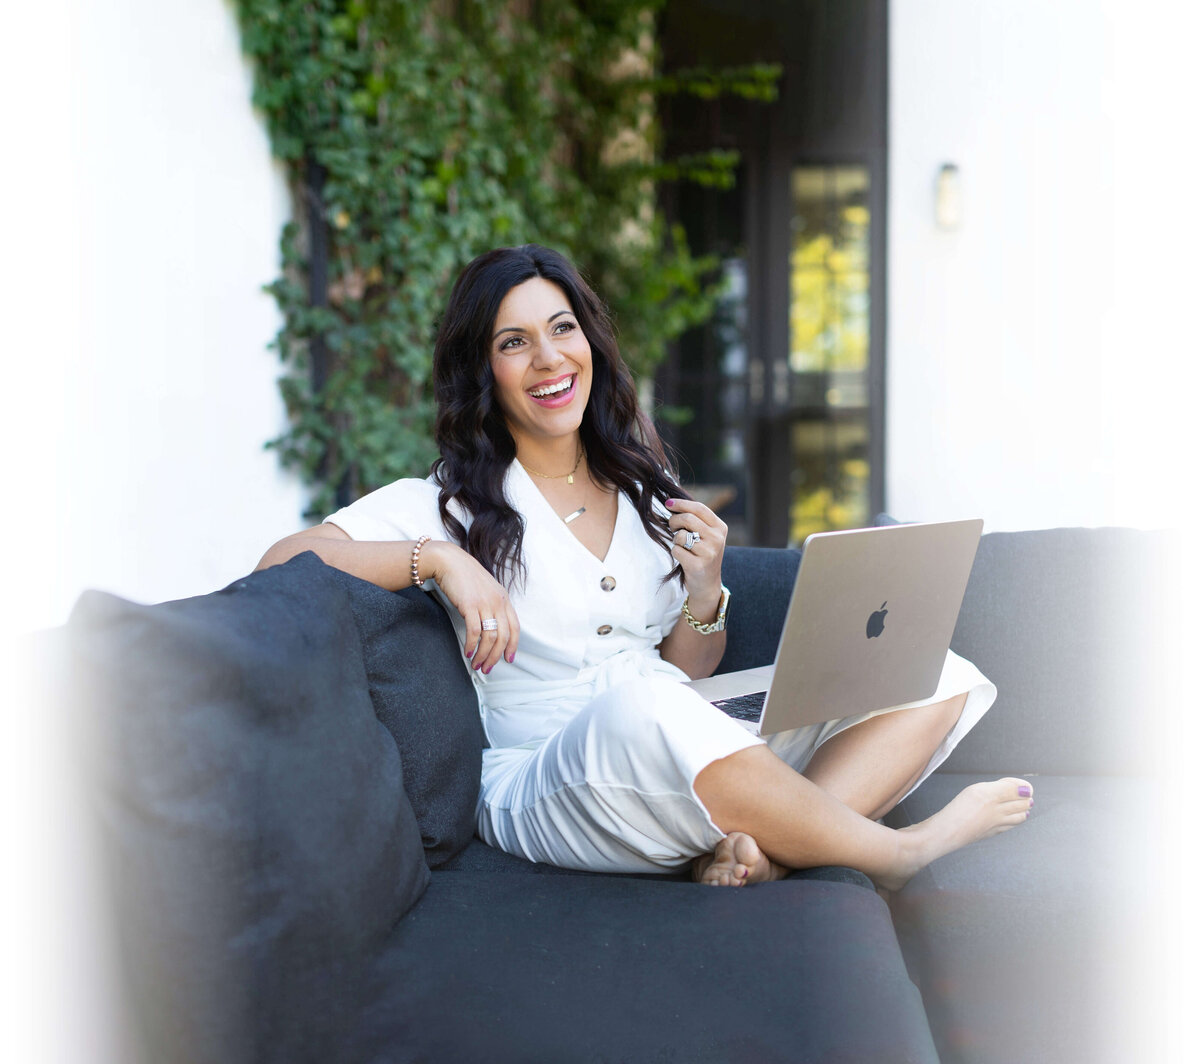 A professional and candid brand photo of Stefanie Gass smiling and sitting cross legged on an outdoor sectional with her laptop open on her lap